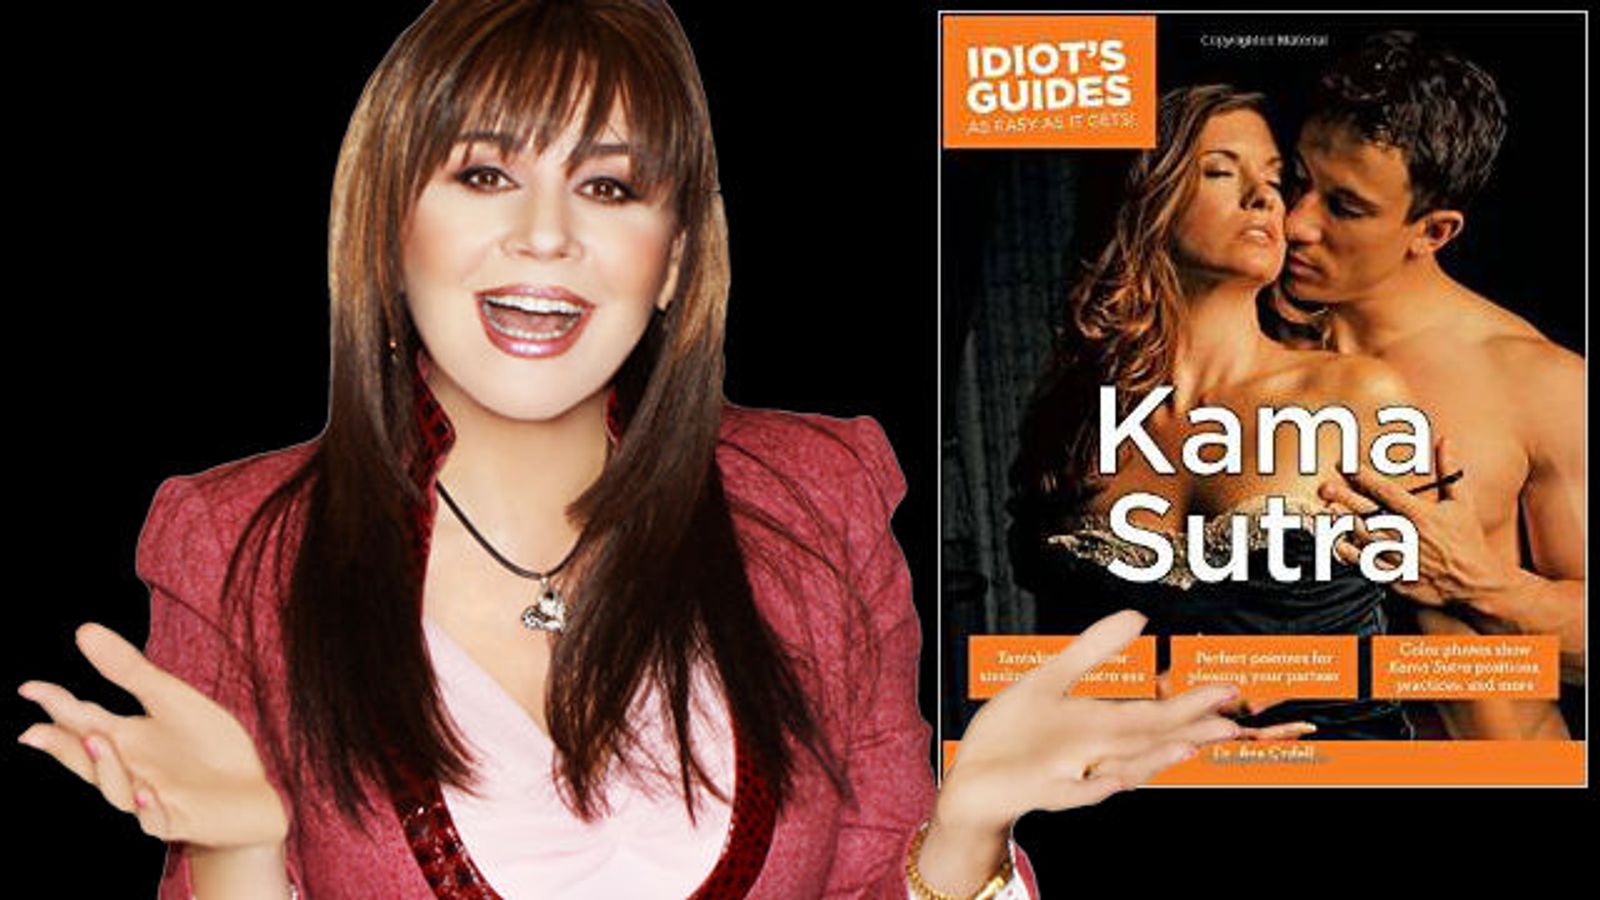 Dr. Ava Cadell Releases 'Idiot Guides: Kama Sutra'